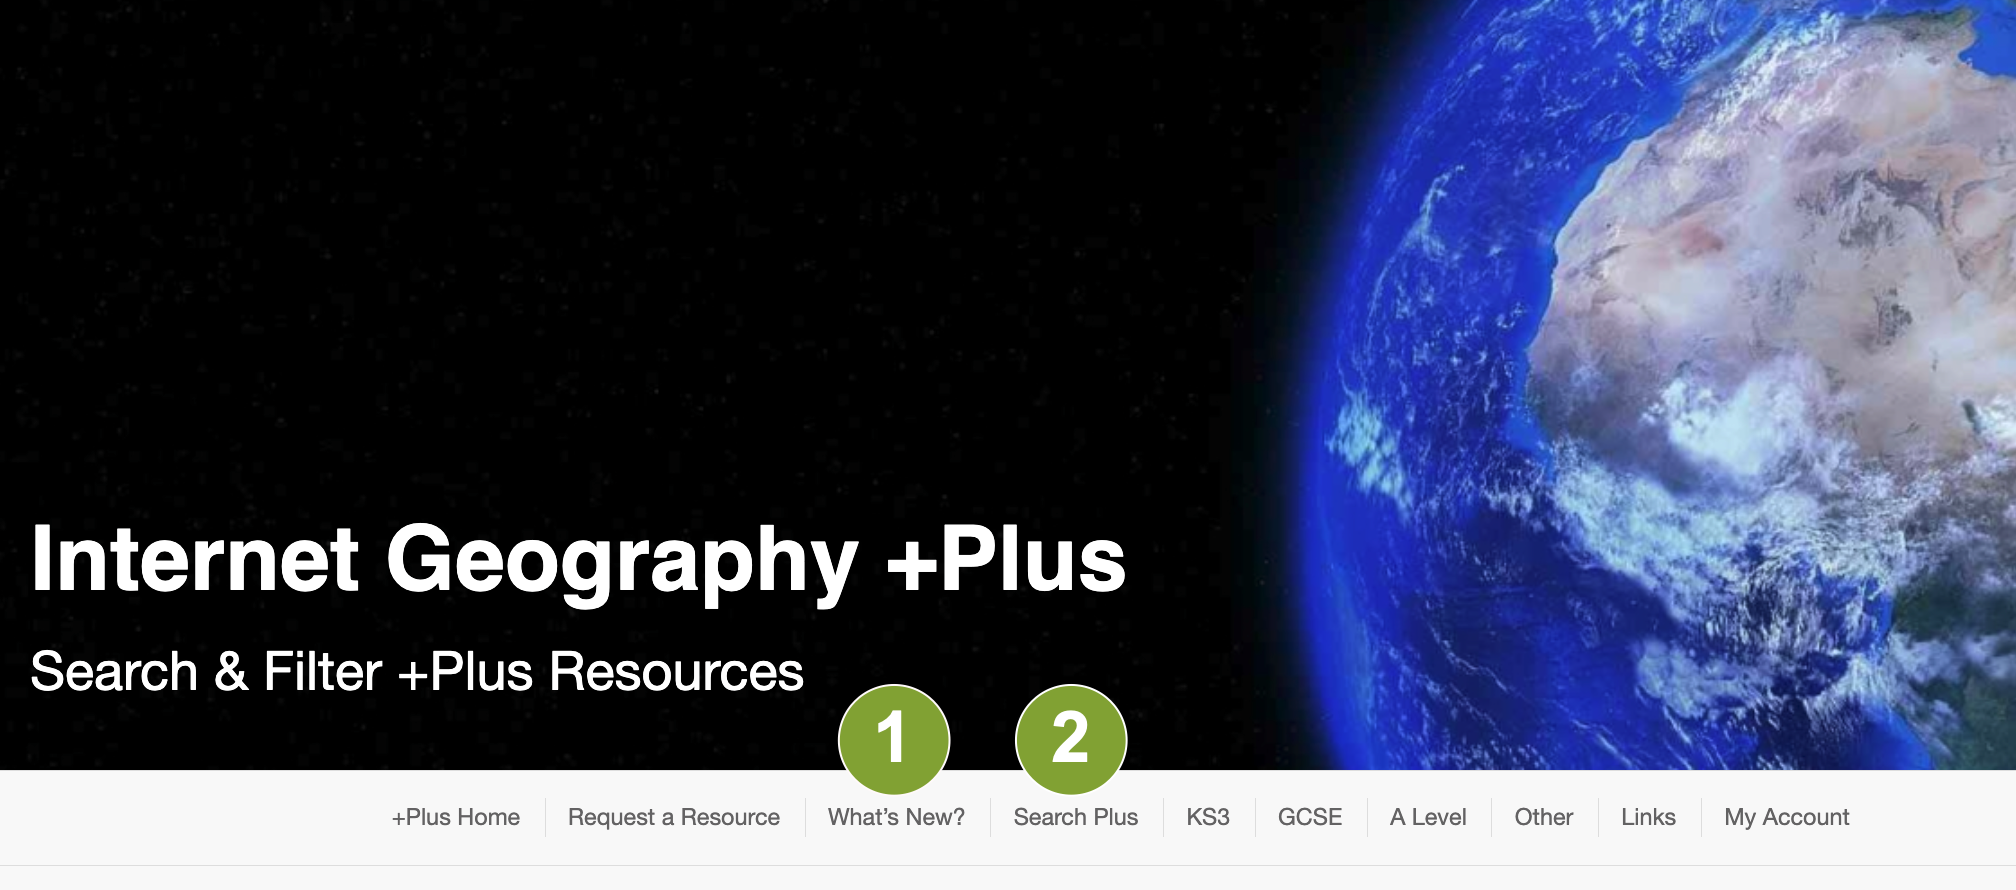 Finding resources on Internet Geography Plus